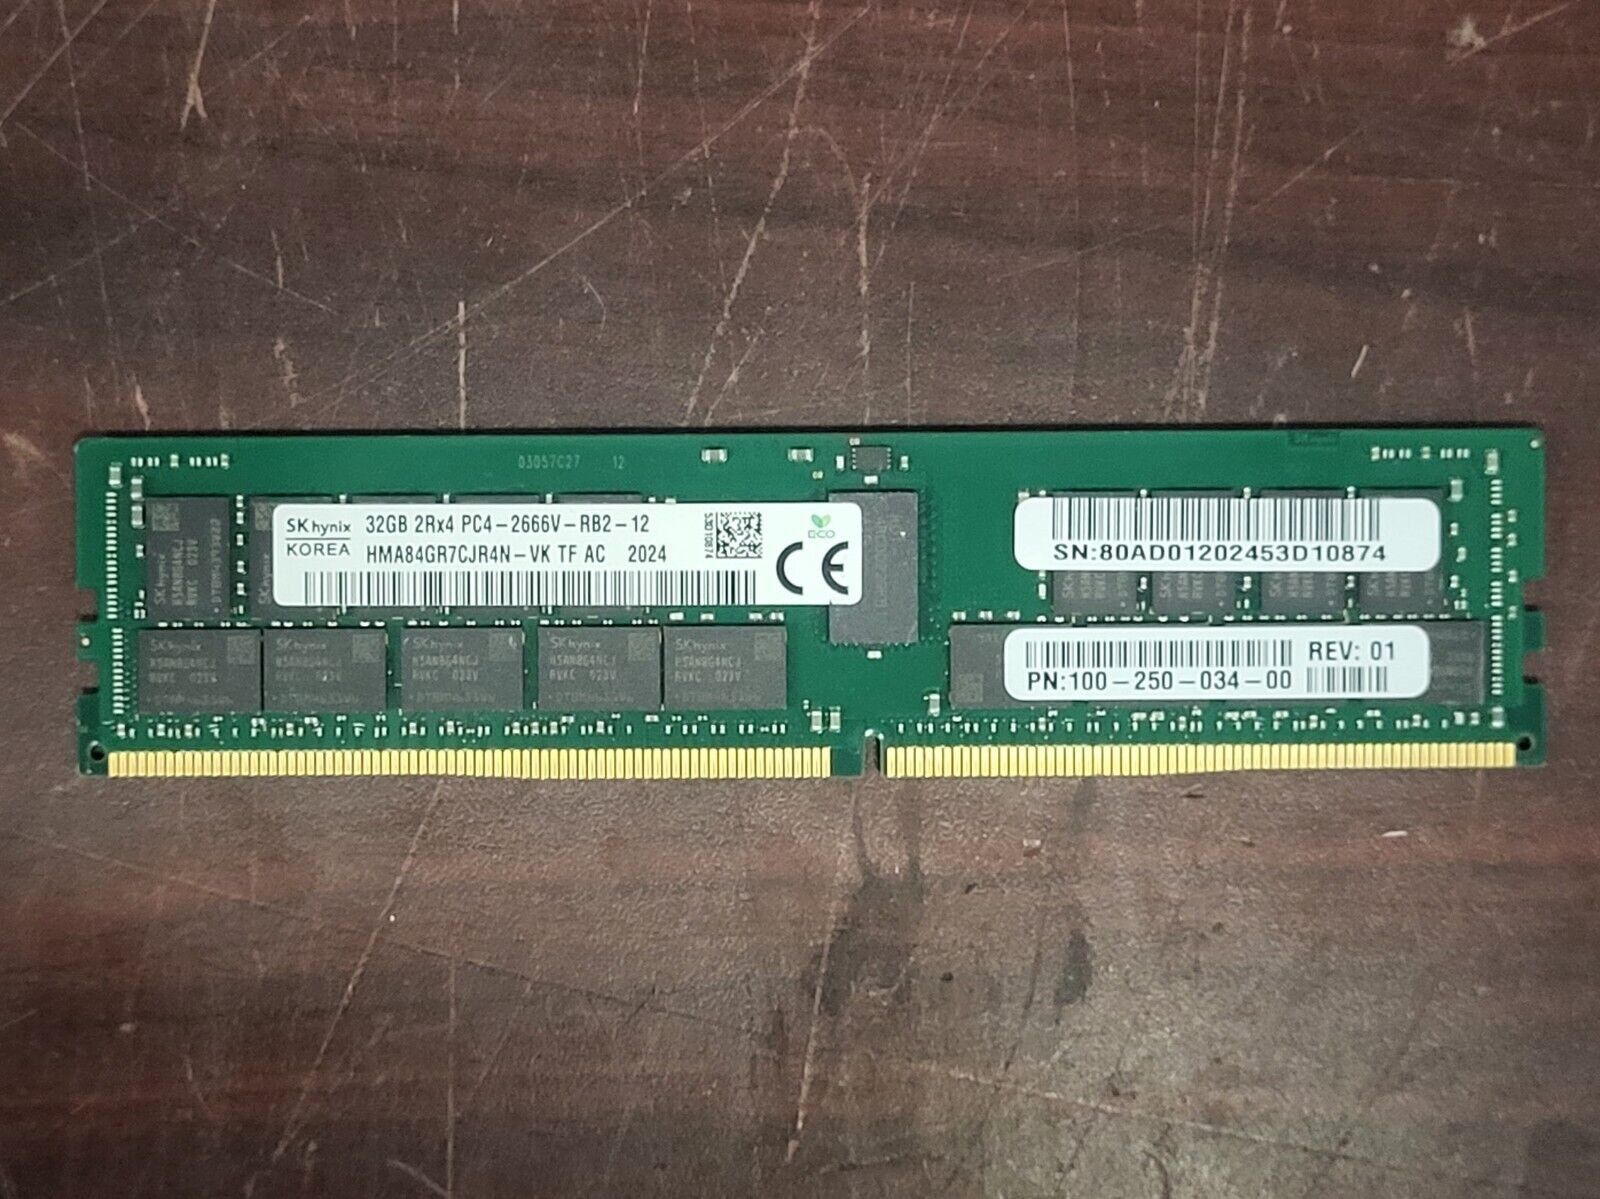 Samsung 32GB PC4 DDR4-2666 Memory PC4-2666V-RB2-12 Tested/Working #73